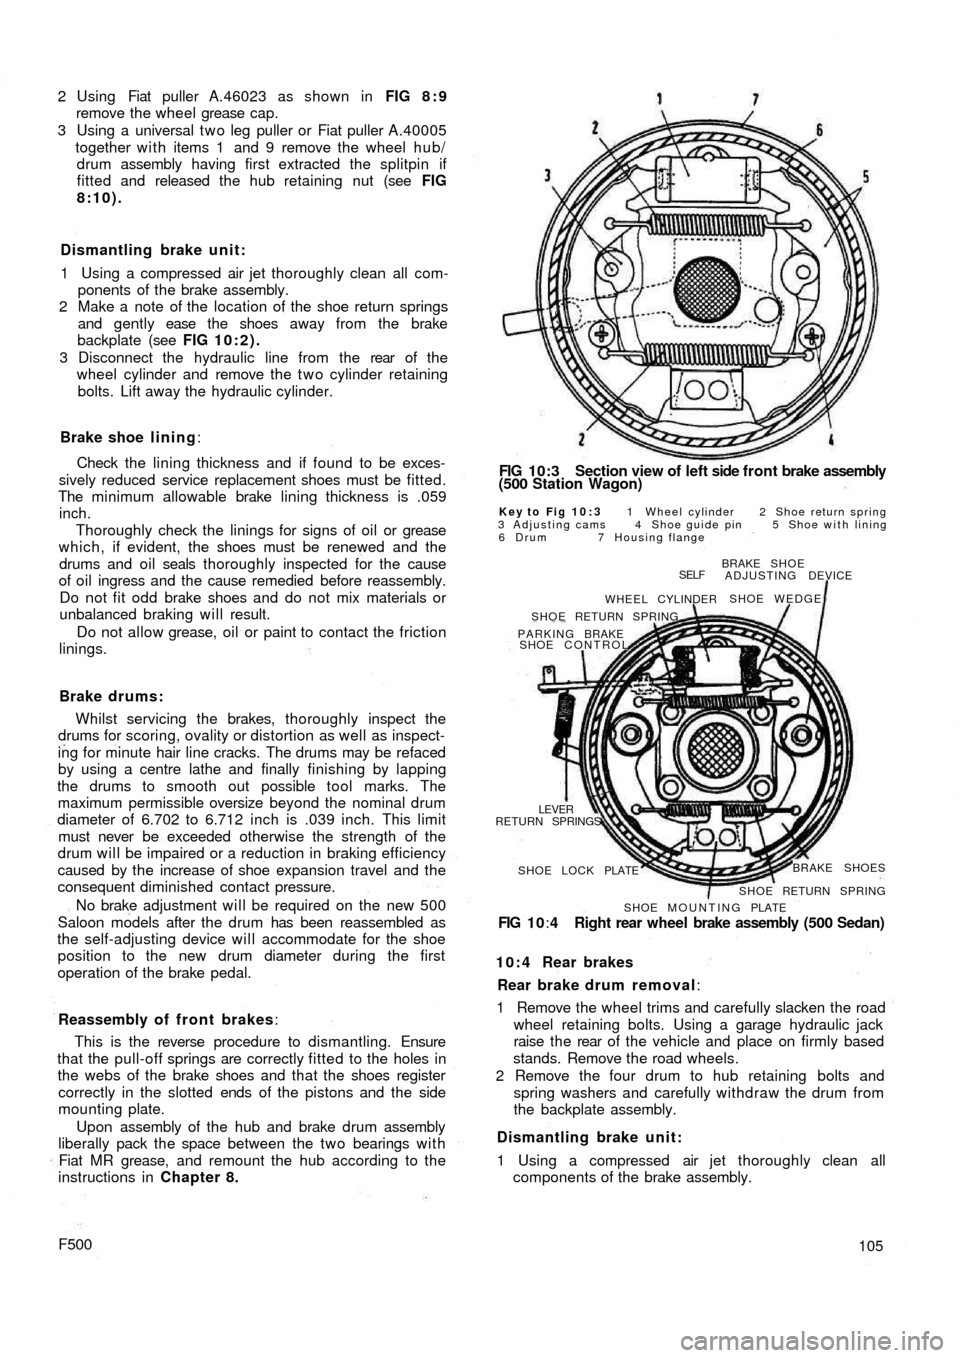 FIAT 500 1964 1.G Owners Manual 2 Using  Fiat puller A.46023 as shown in FIG 8 : 9
remove the wheel grease cap.
3 Using a universal t w o leg puller or Fiat puller A.40005
together w i t h items 1  and 9 remove the wheel hub/
drum a